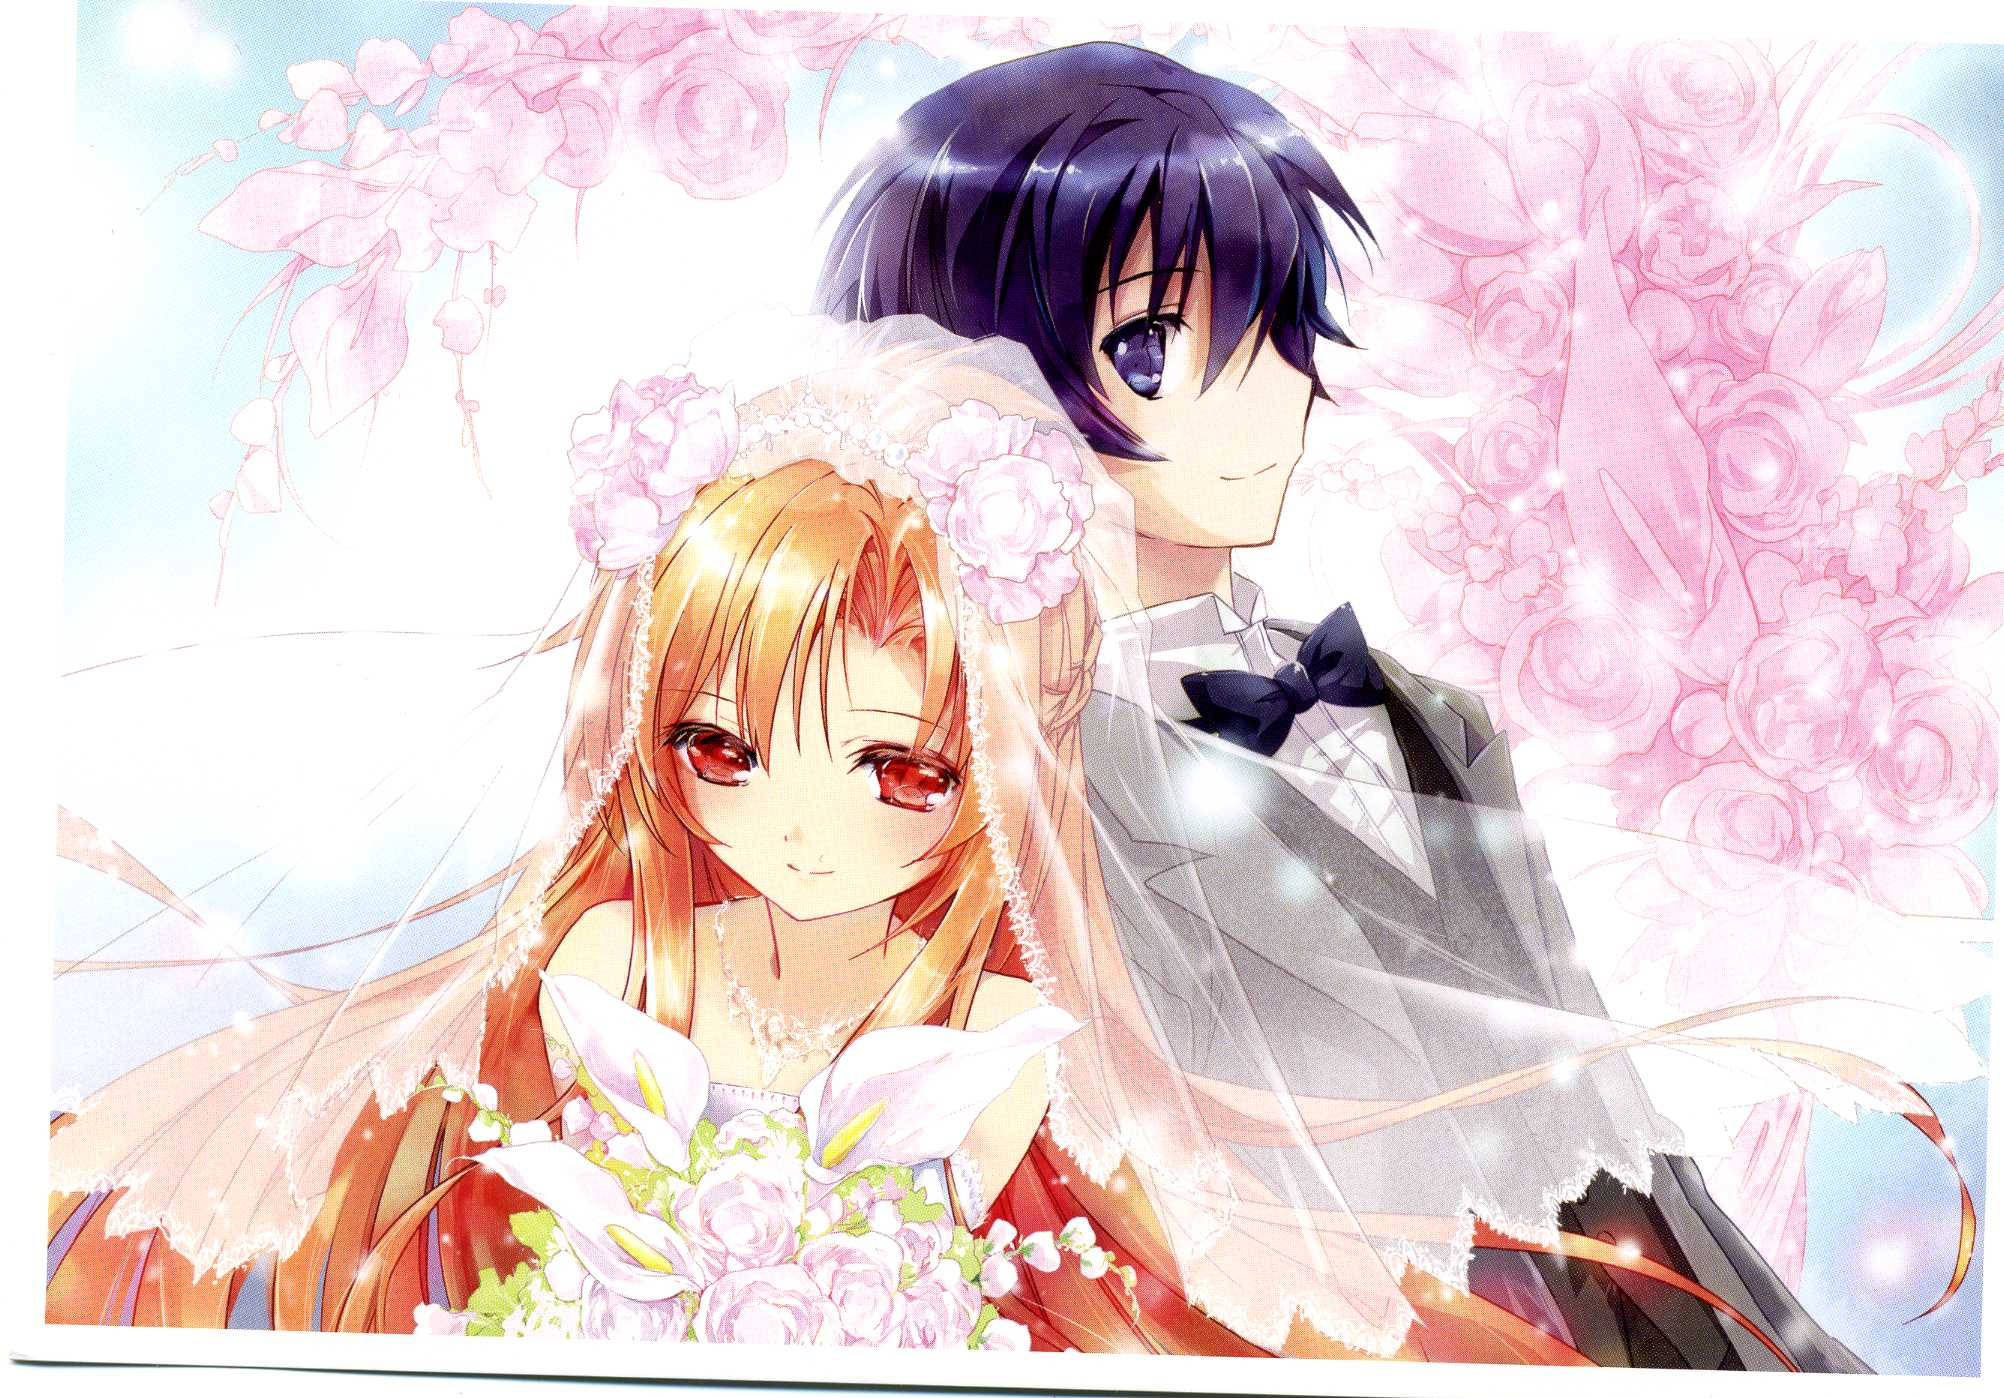 Wedding ceremonies with handsome anime men now being offered at Akihabara  VR center | SoraNews24 -Japan News-